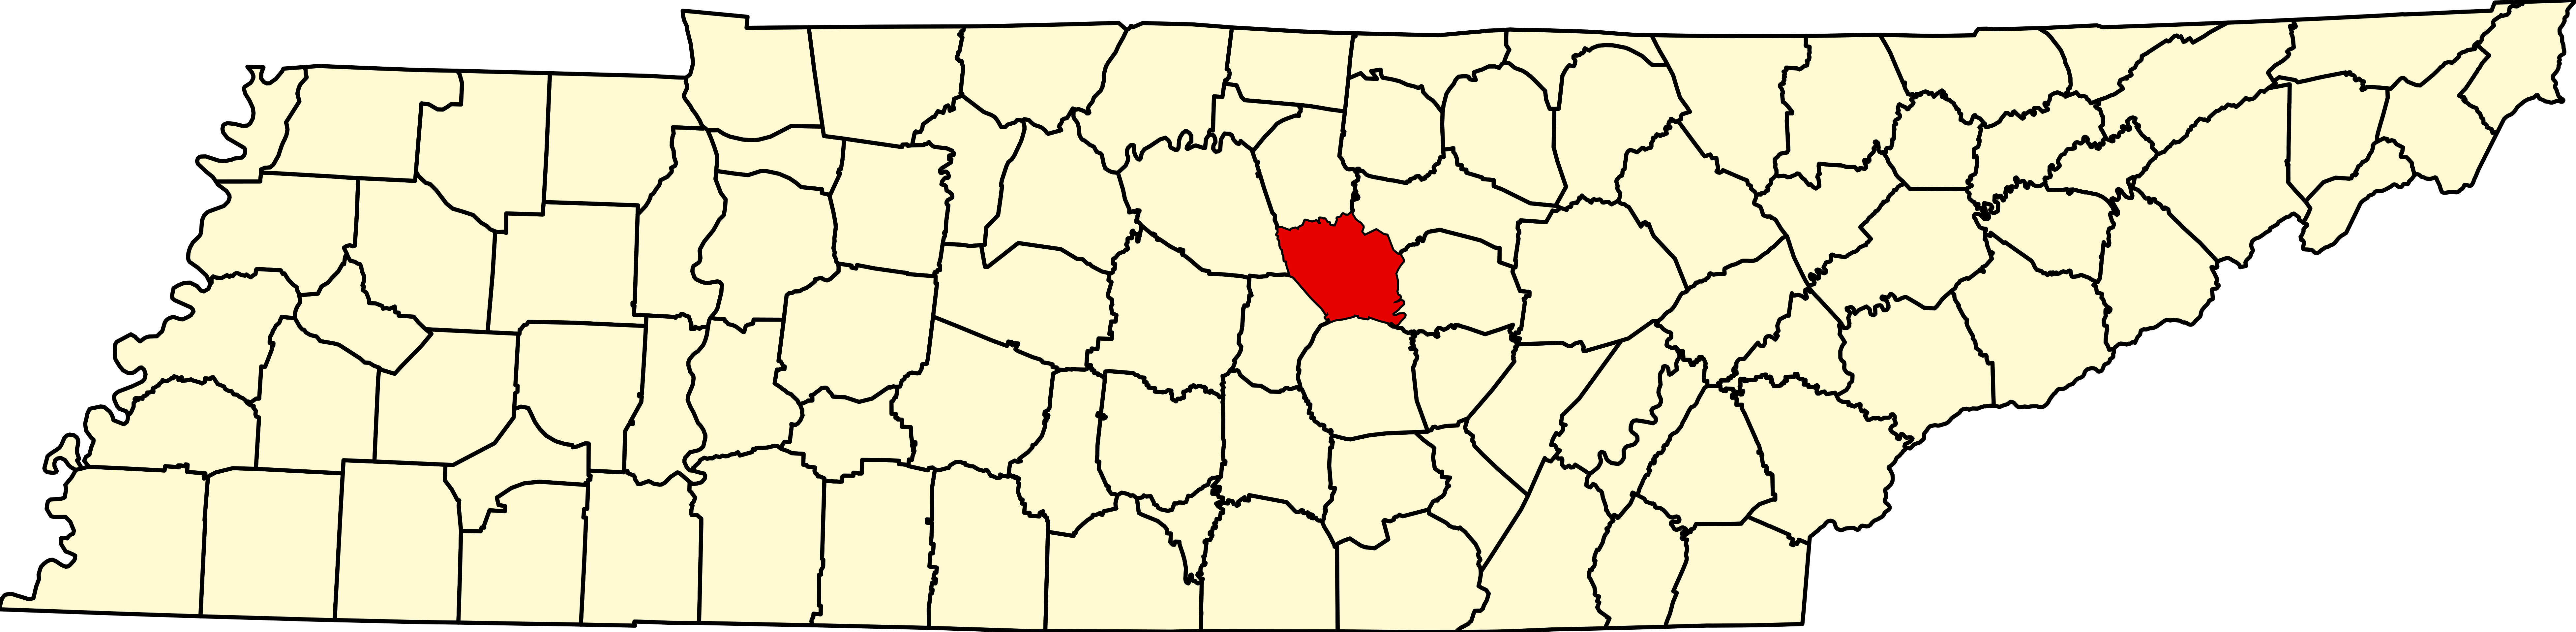 upload.wikimedia.org/wikipedia/commons/thumb/c/c7/Map_of_Tennessee_highlighting_DeKalb_County.svg/7814px-Map_of_Tennessee_highlighting_DeKalb_County.svg.png